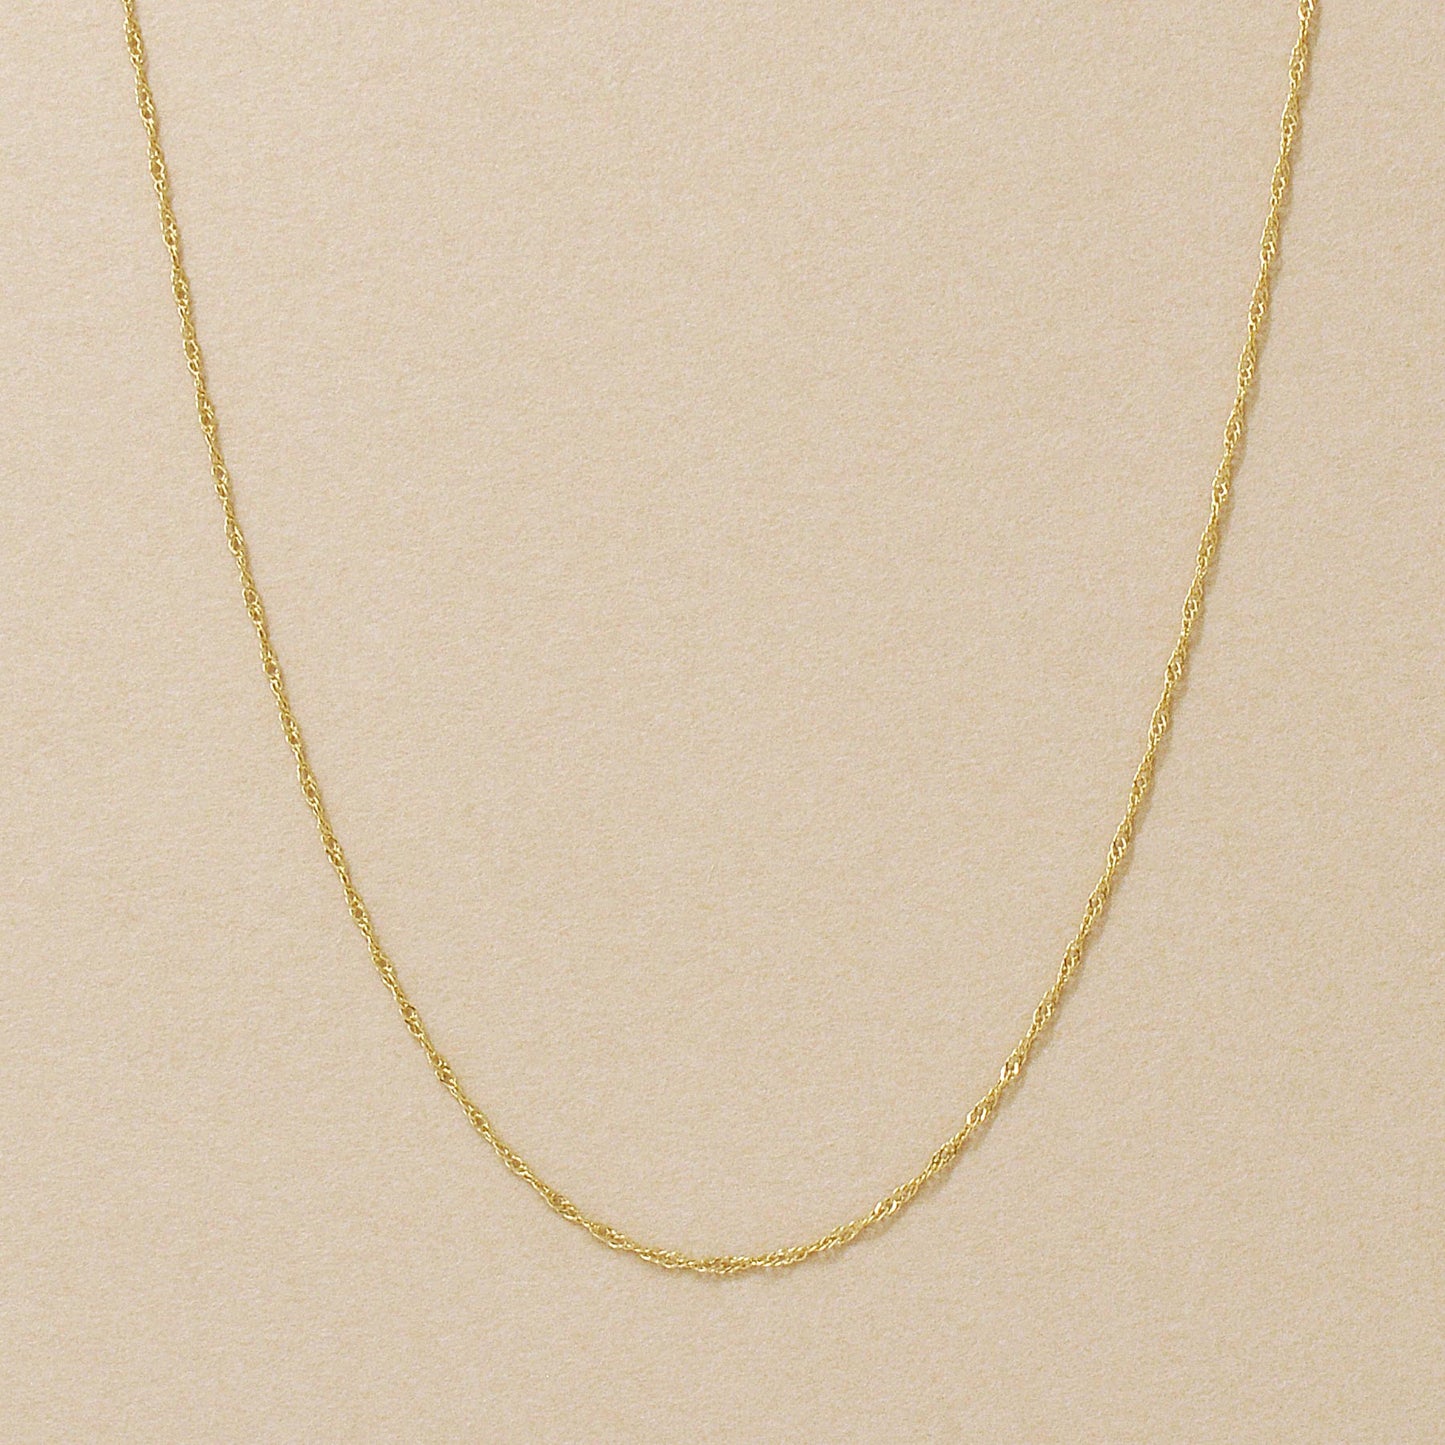 10K Screw Chain Necklace 50cm (Yellow Gold) - Product Image